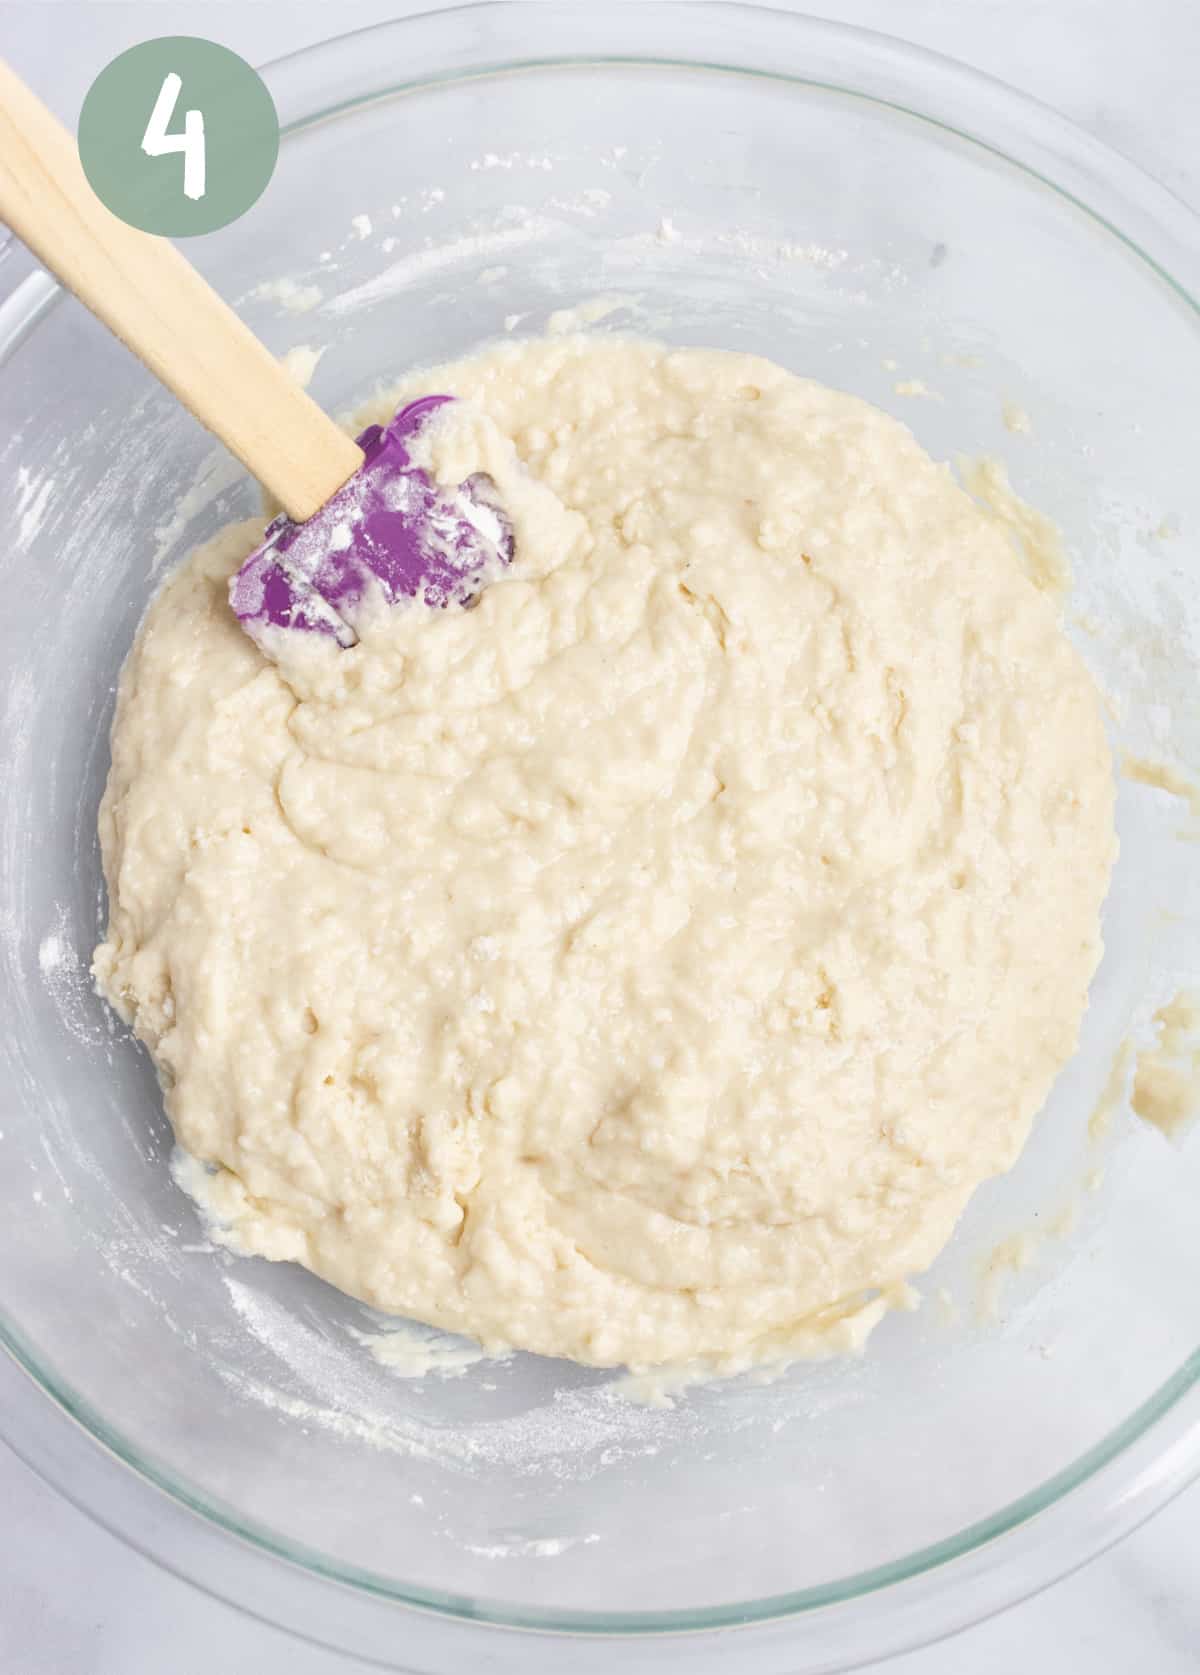 Batter mixed with a purple rubber spatula in a glass bowl.